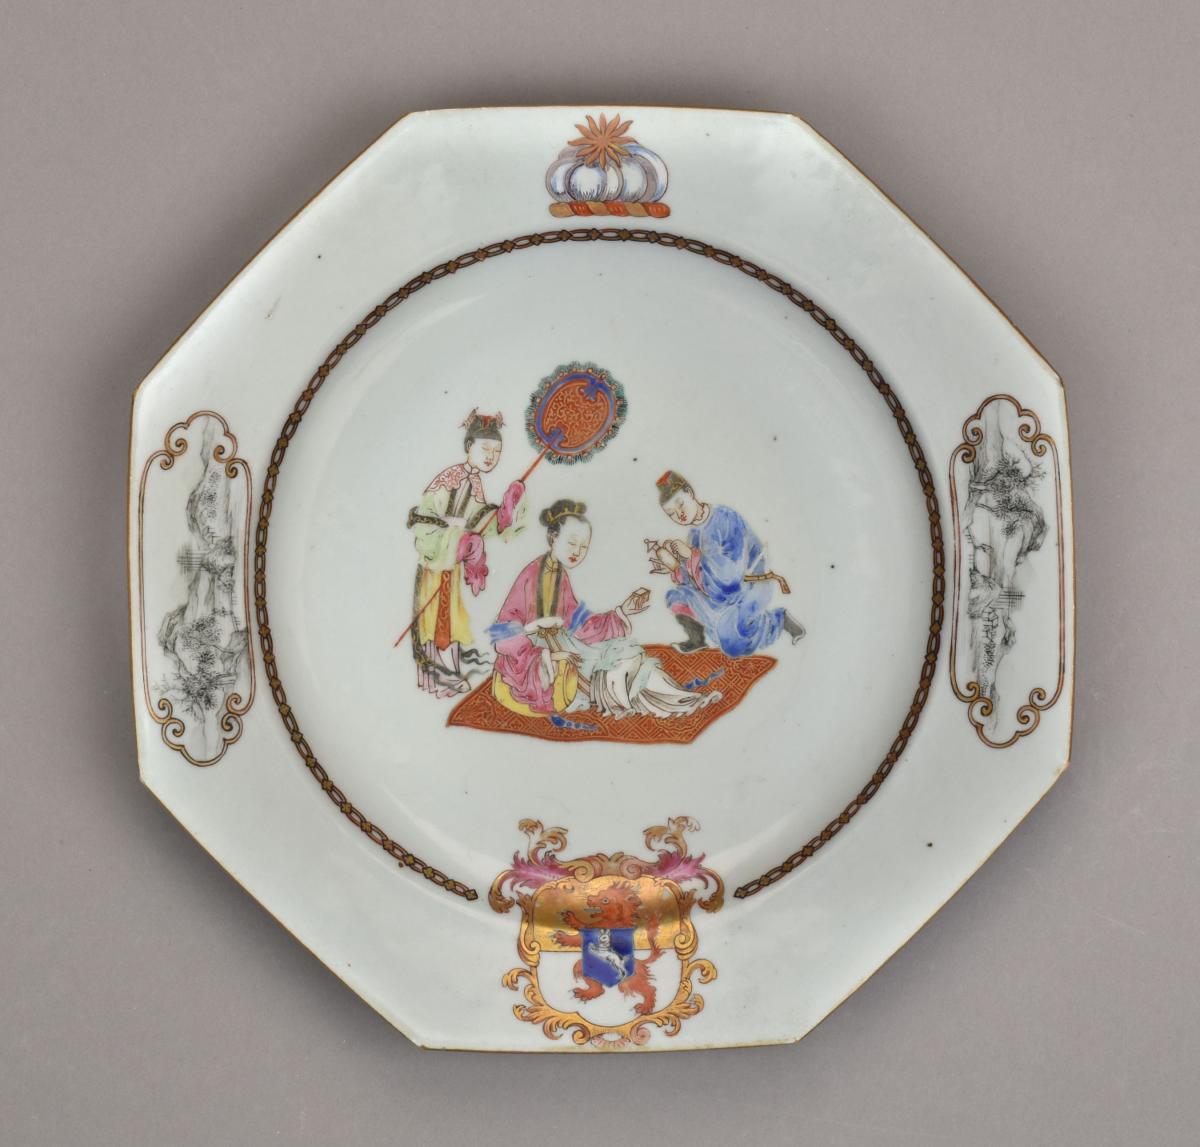 A finely painted Chinese armorial octagonal plate, c.1750